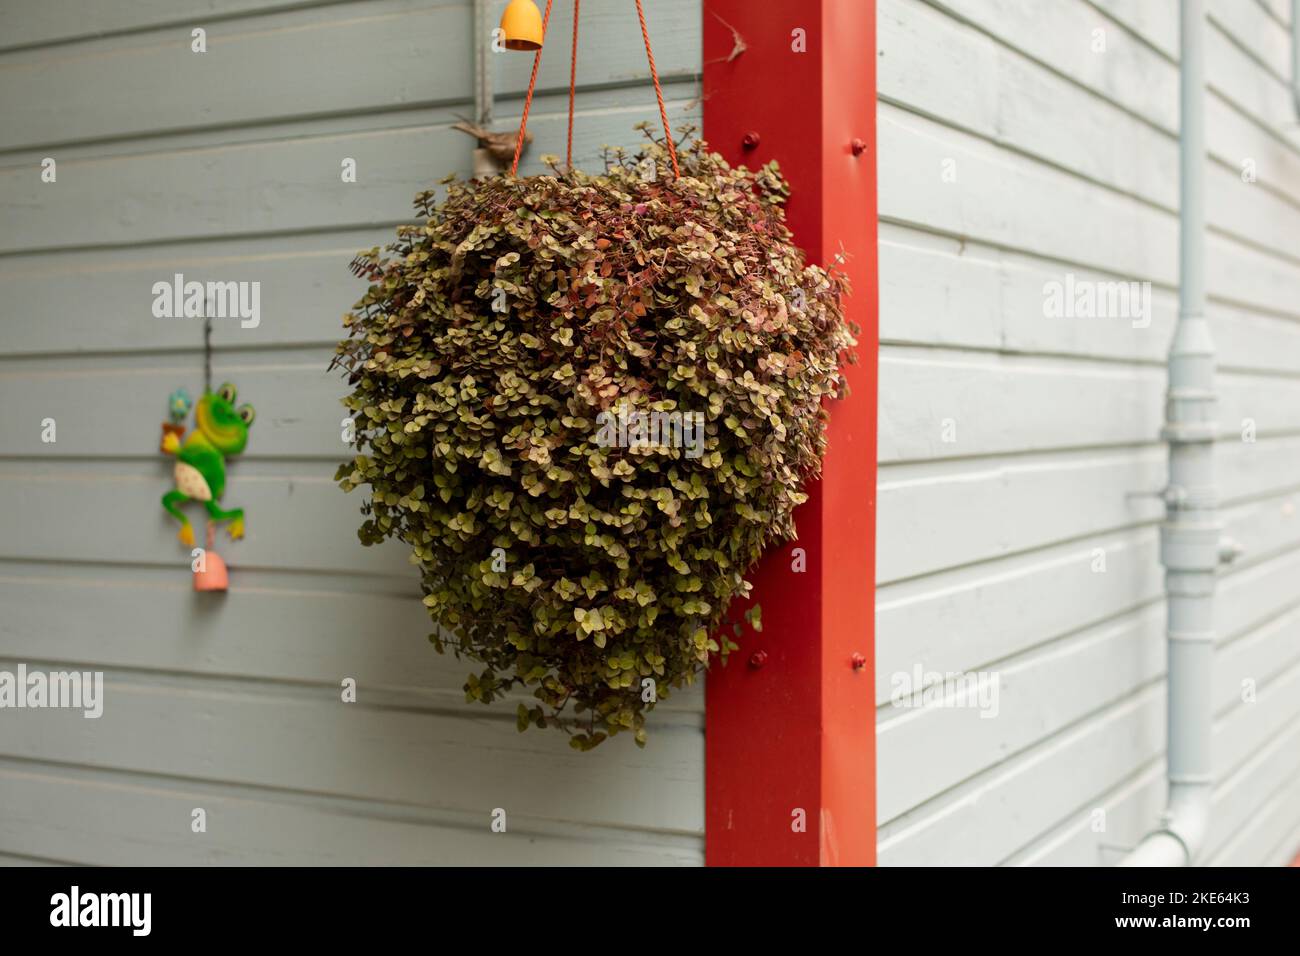 Plant on house. Plant hangs on wall. Wall of house. Corner of building. Stock Photo